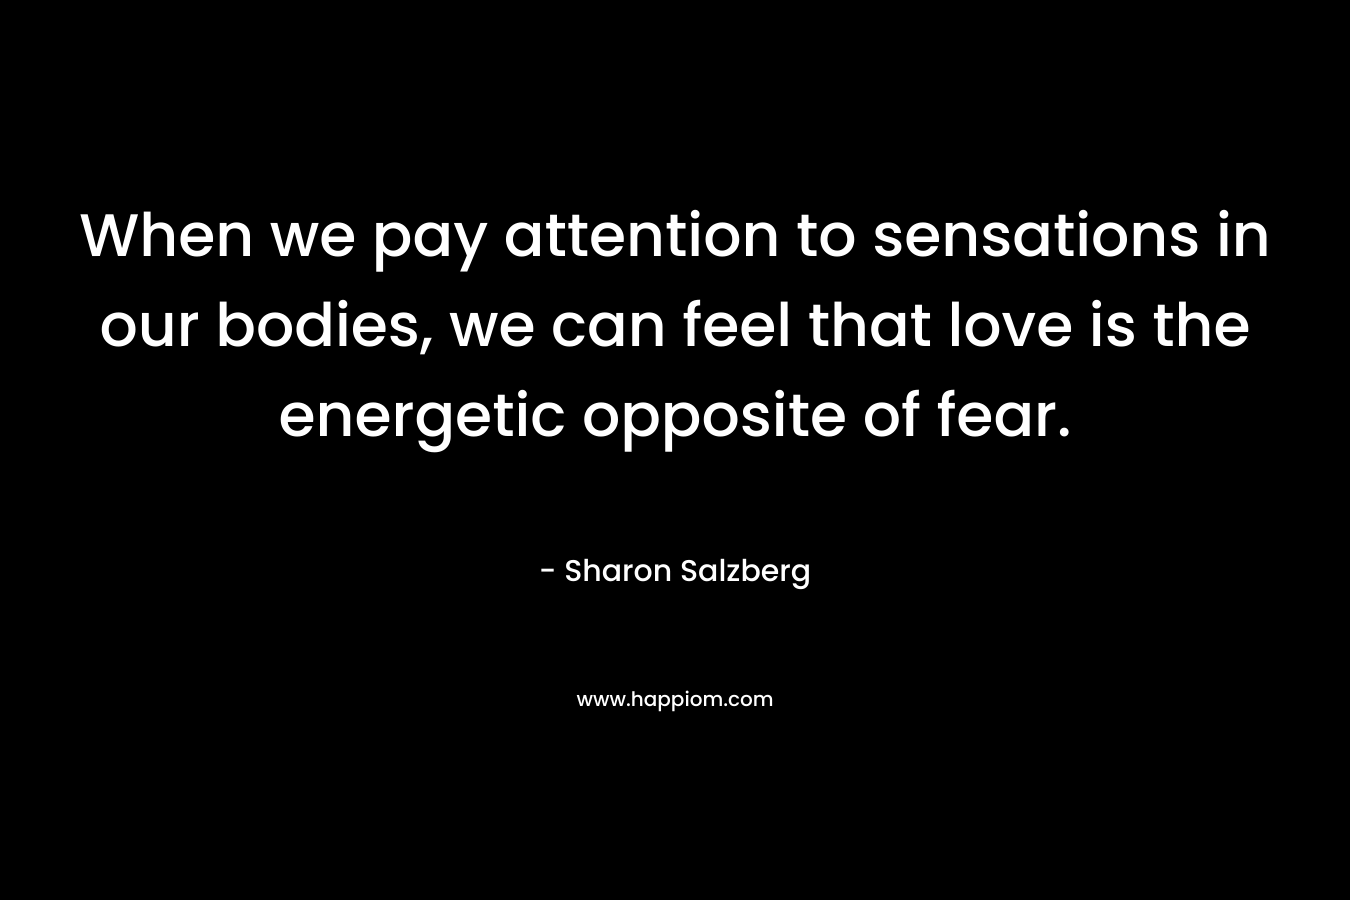 When we pay attention to sensations in our bodies, we can feel that love is the energetic opposite of fear.